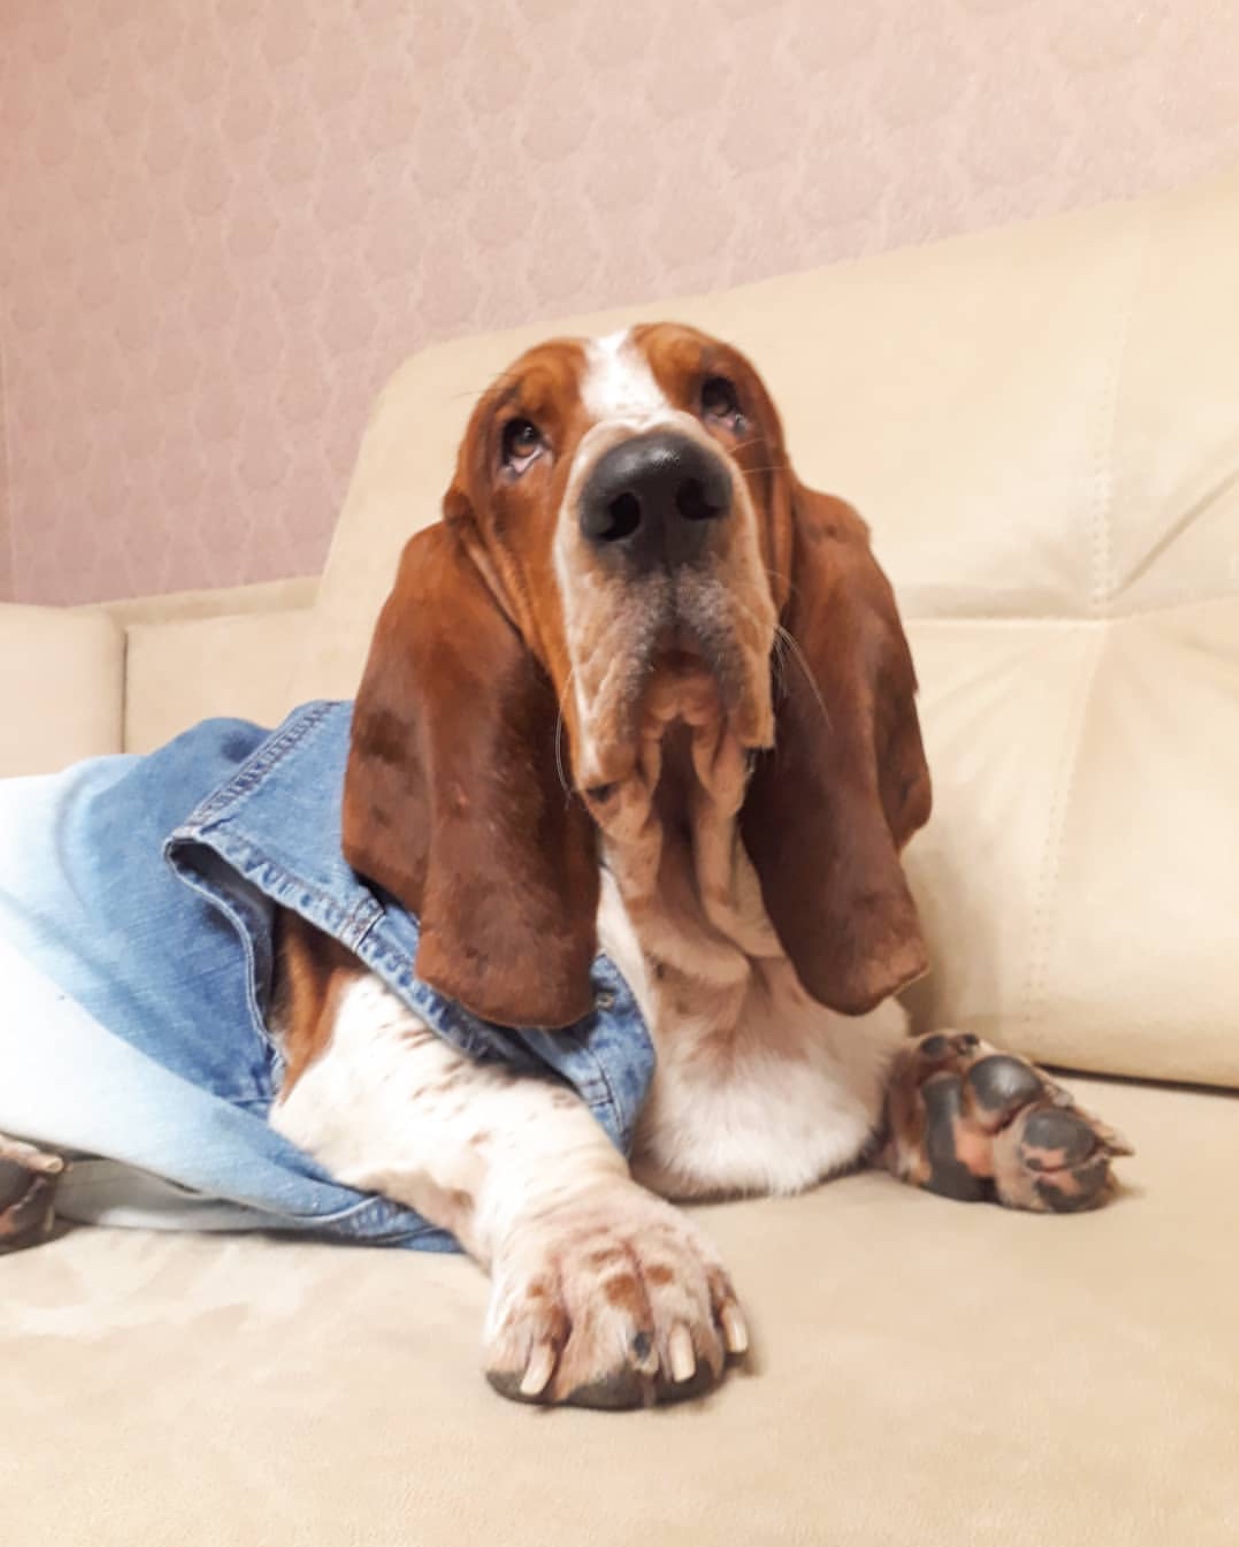 A Basset Hound wearing denim jacket while lying on top of the bed